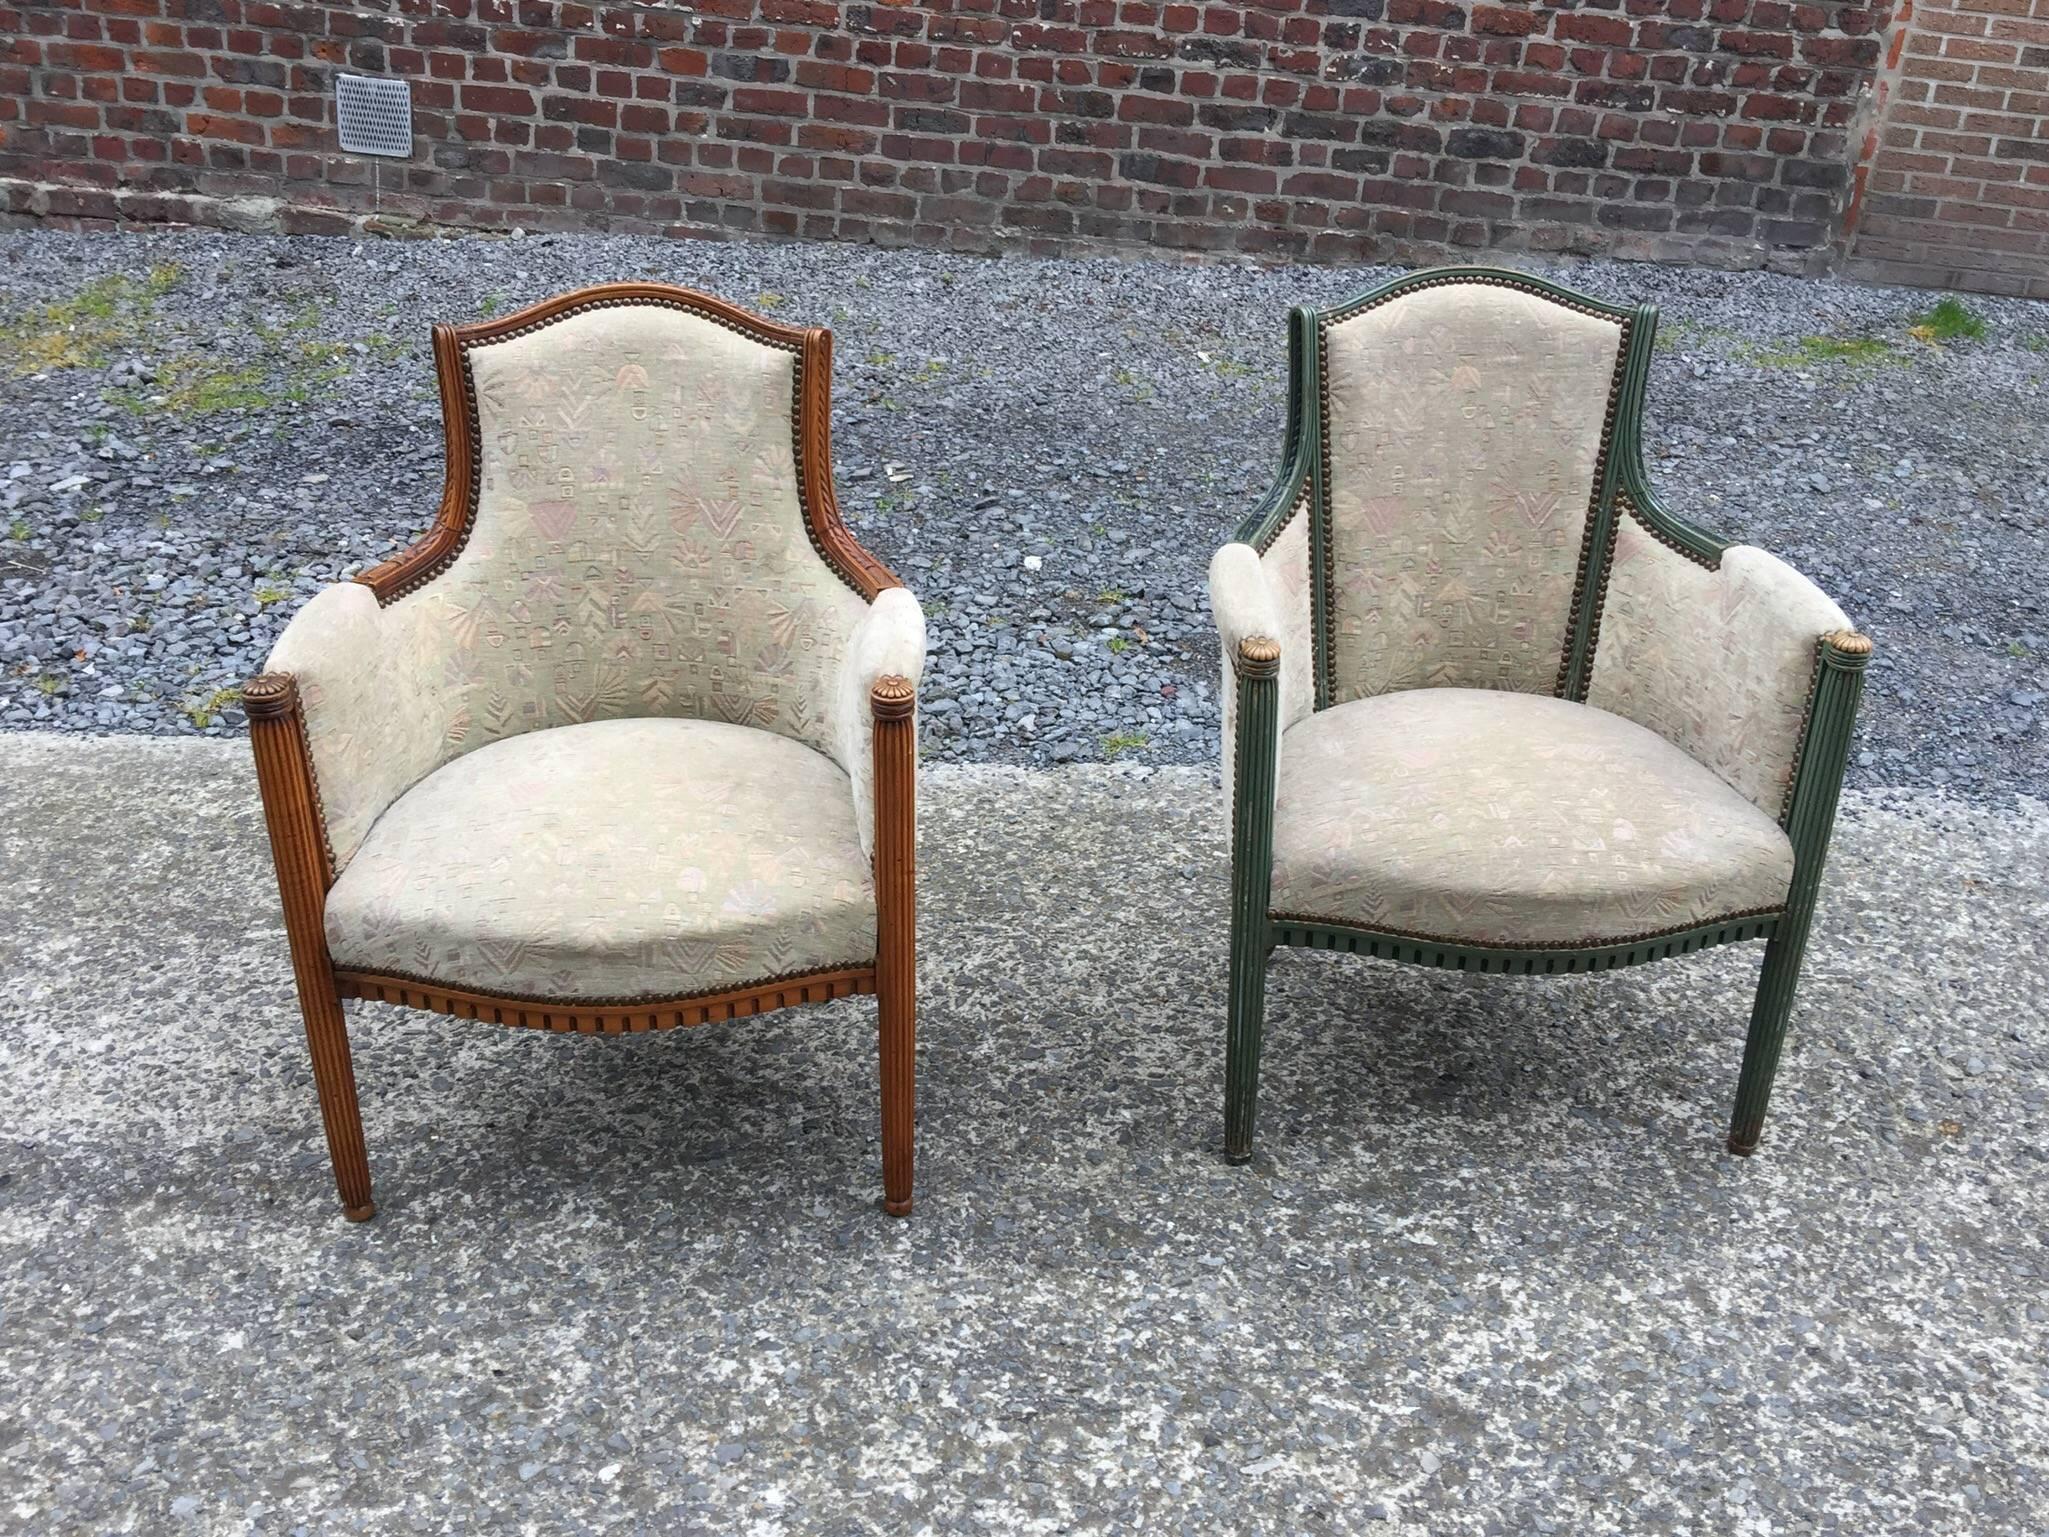 two  elegant Art Deco armchairs, circa 1925-1930
Same model but one with green patina and the other in natural wood.

 